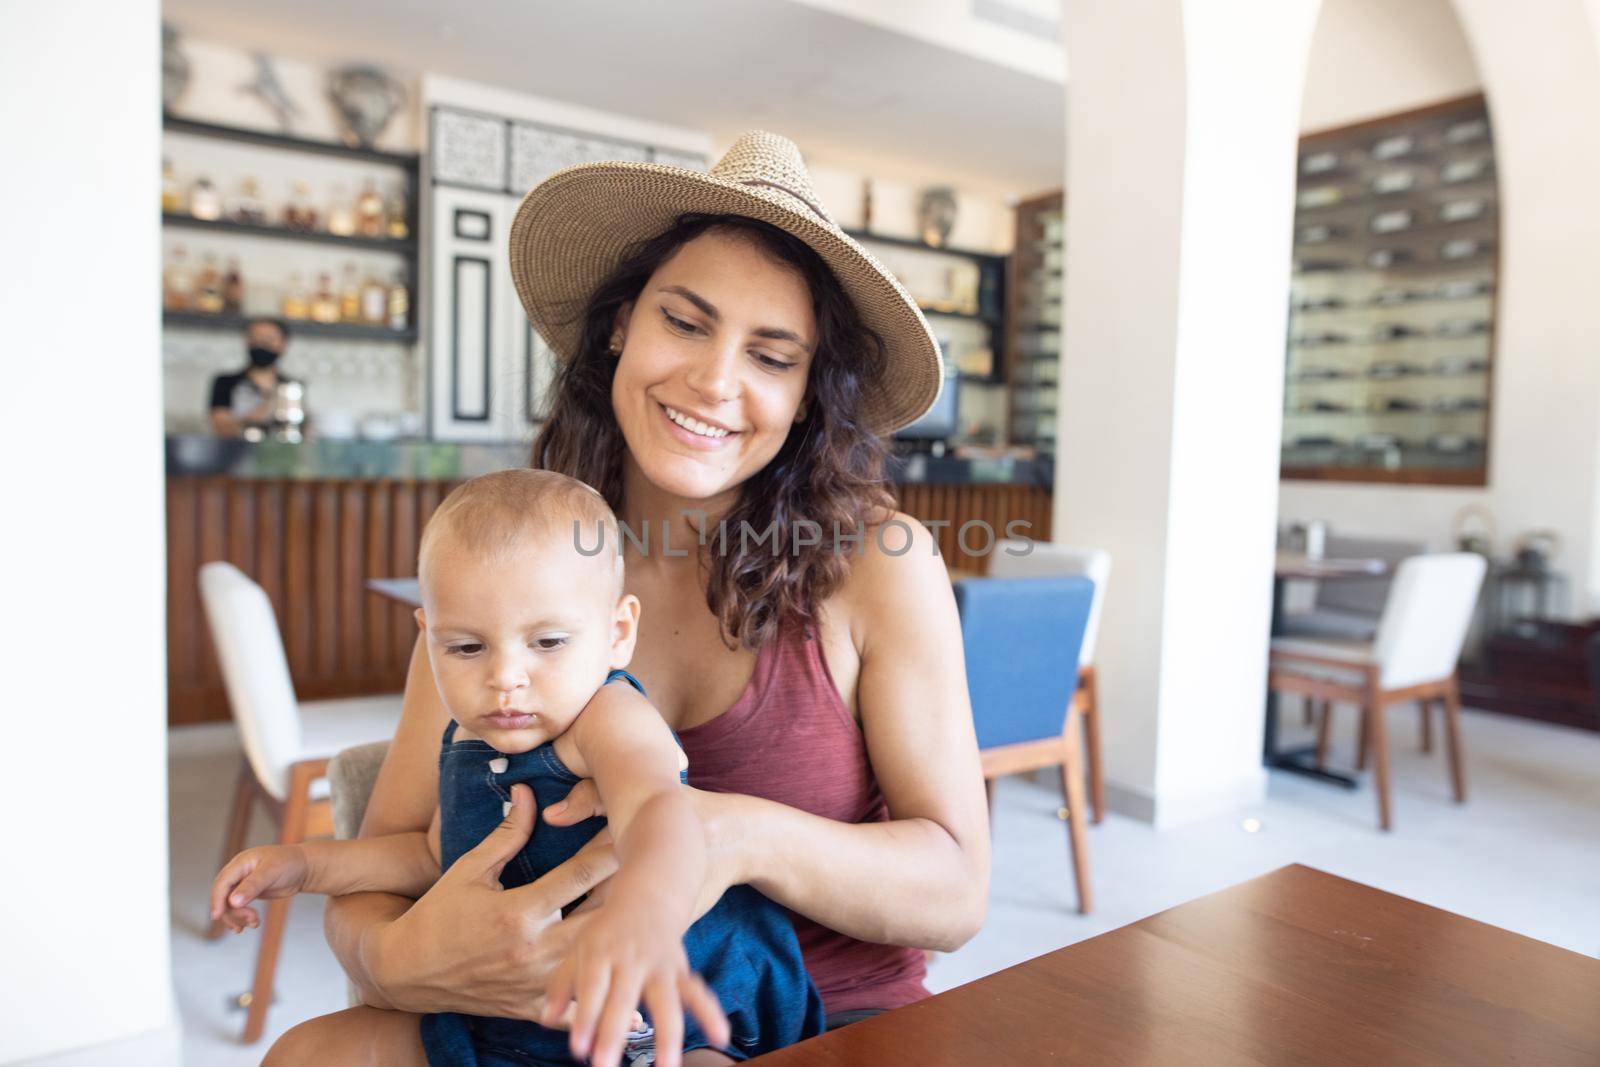 Portrait of beautiful smiling mother wearing a hat and holding adorable baby in restaurant. Happy brunette woman and young daughter at table with cafe counter as background. Family having breakfast